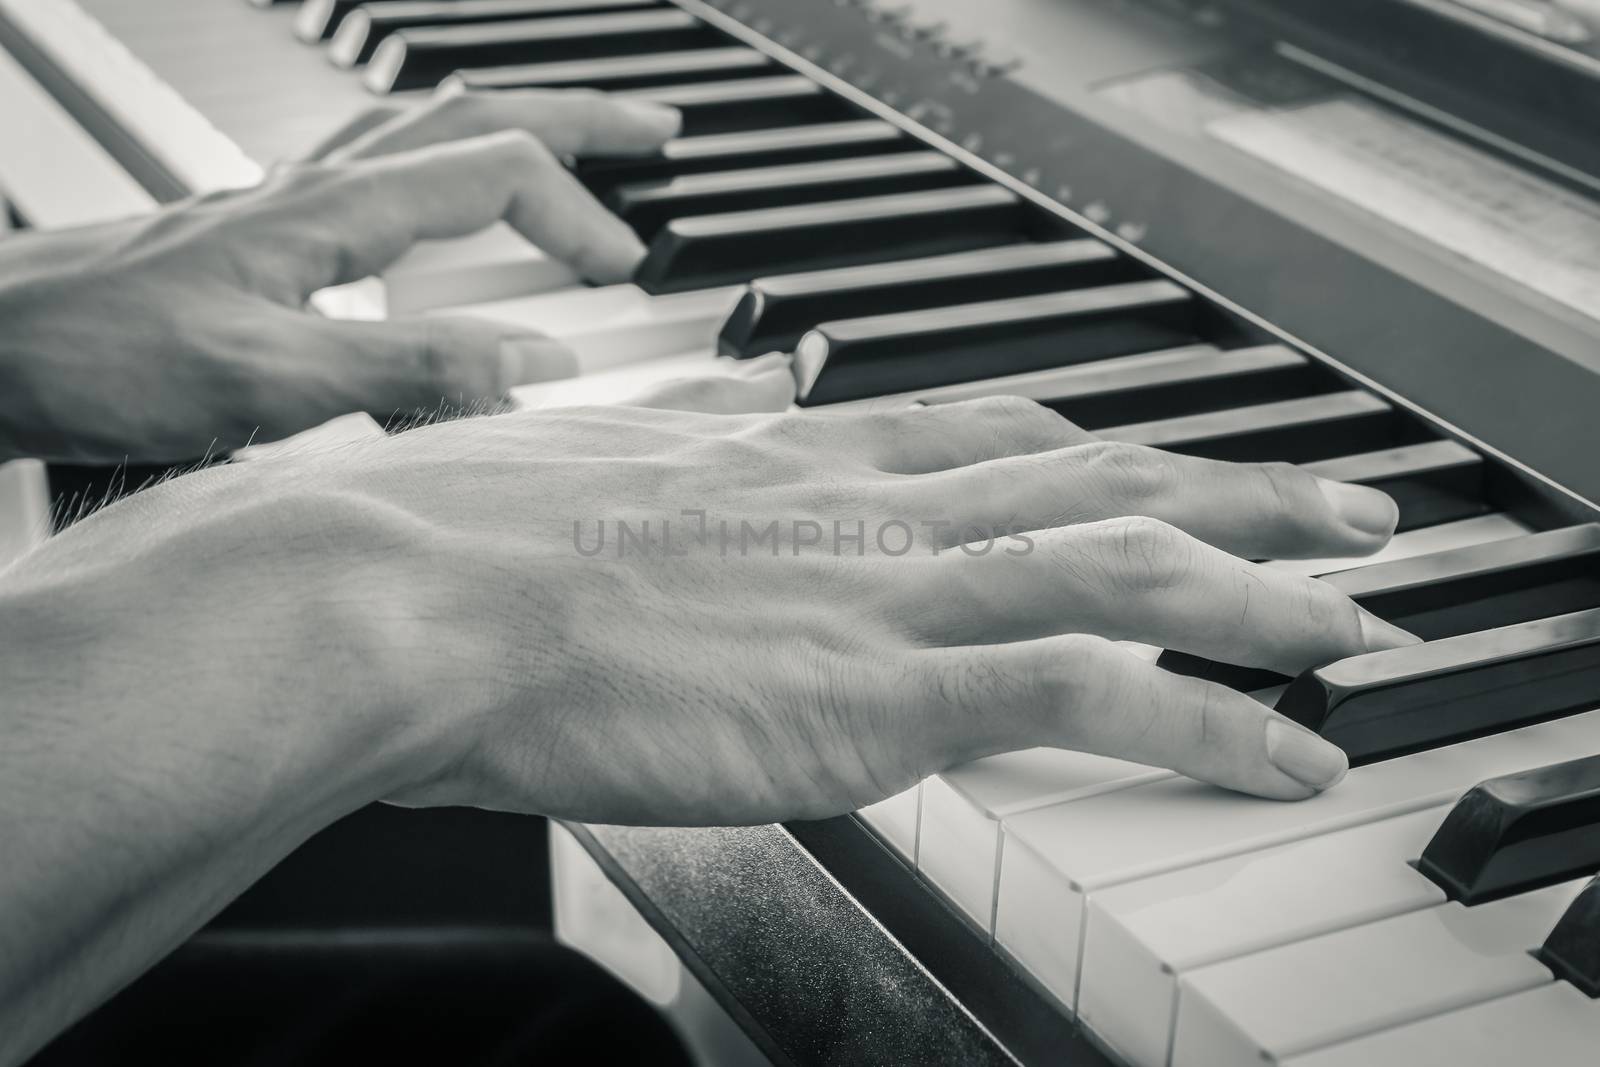 Hand of Piano Player on White Keys and Black Keys of Electric Piano in Crosswise View